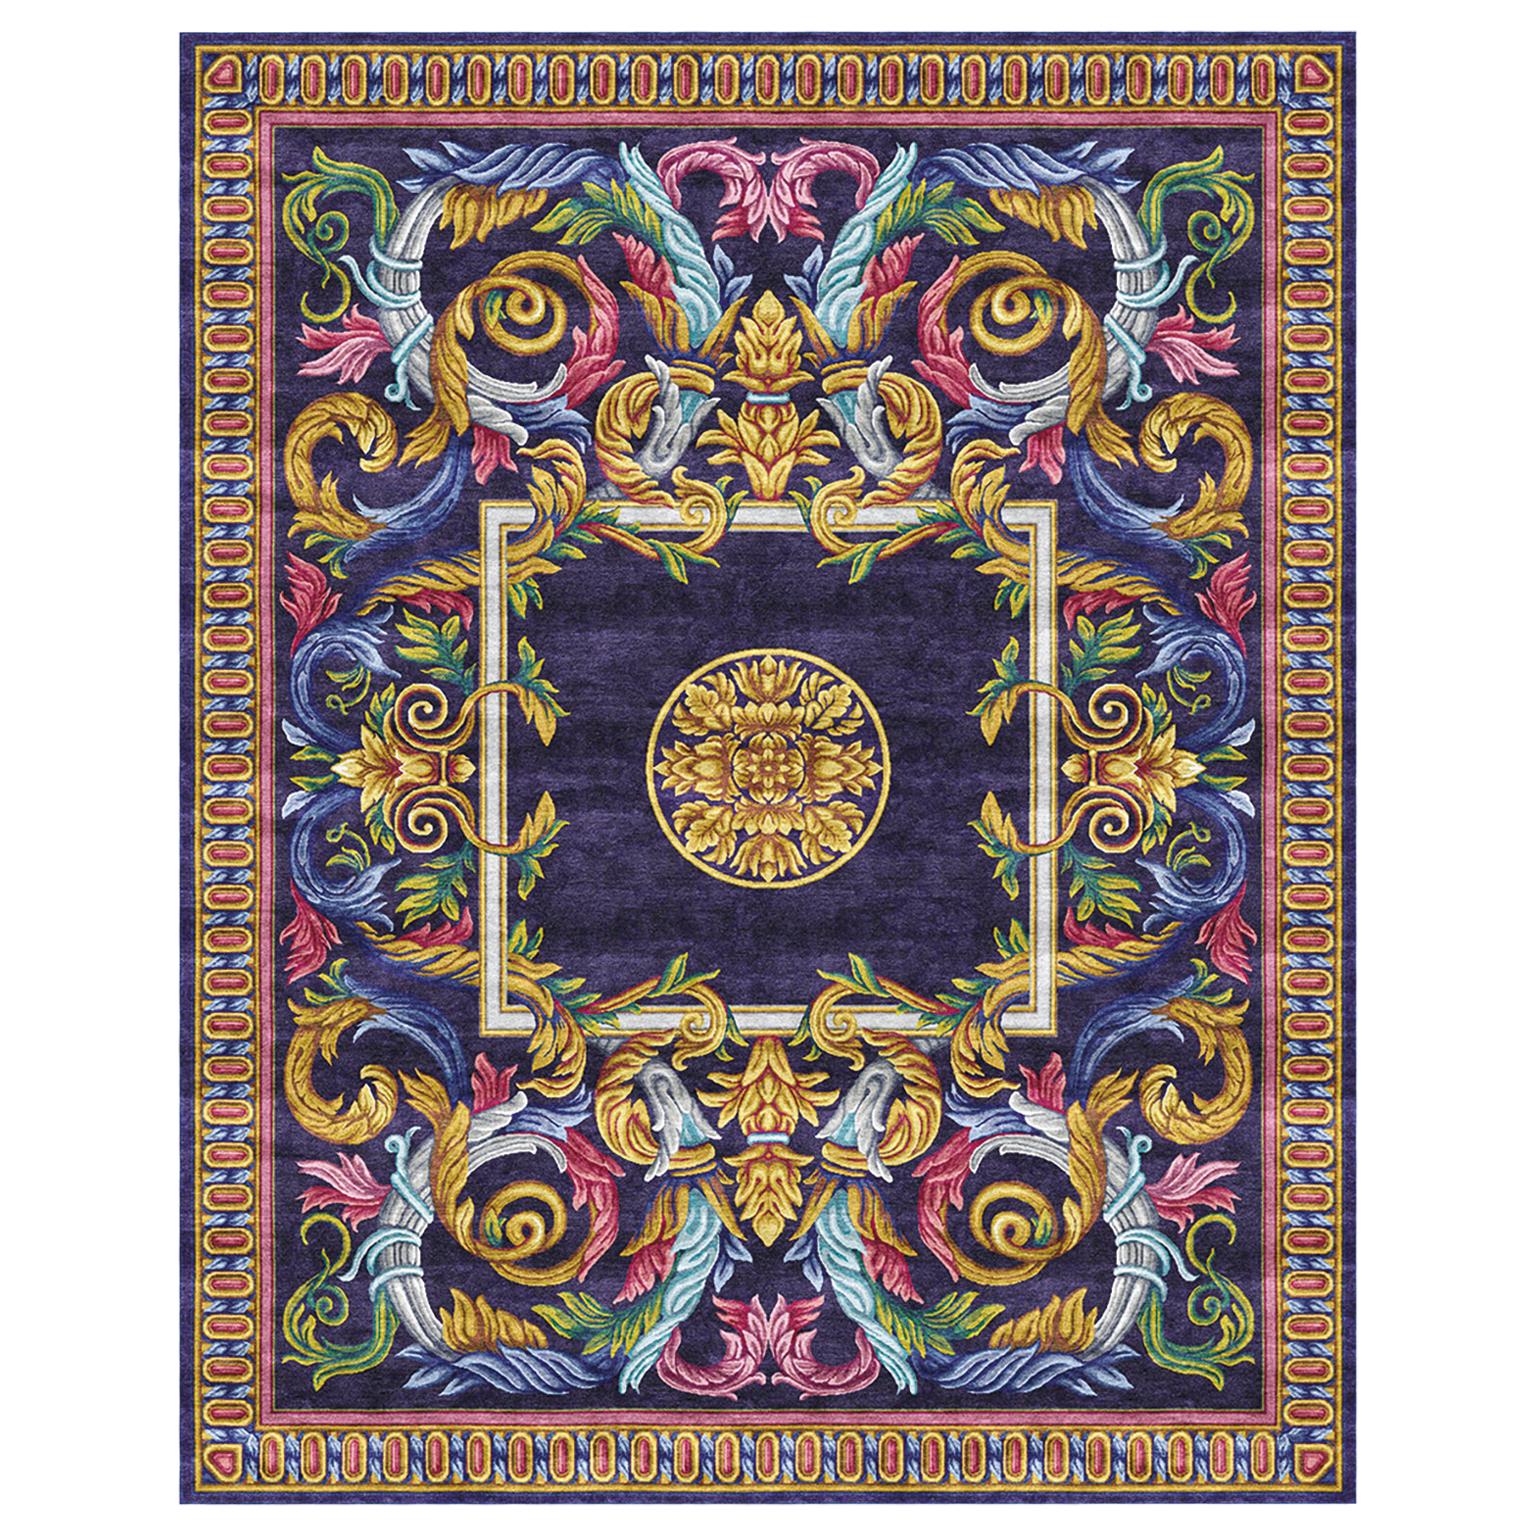 Aubusson Heraldy Heritage - Colorful Luxury Hand Knotted Silk Rug